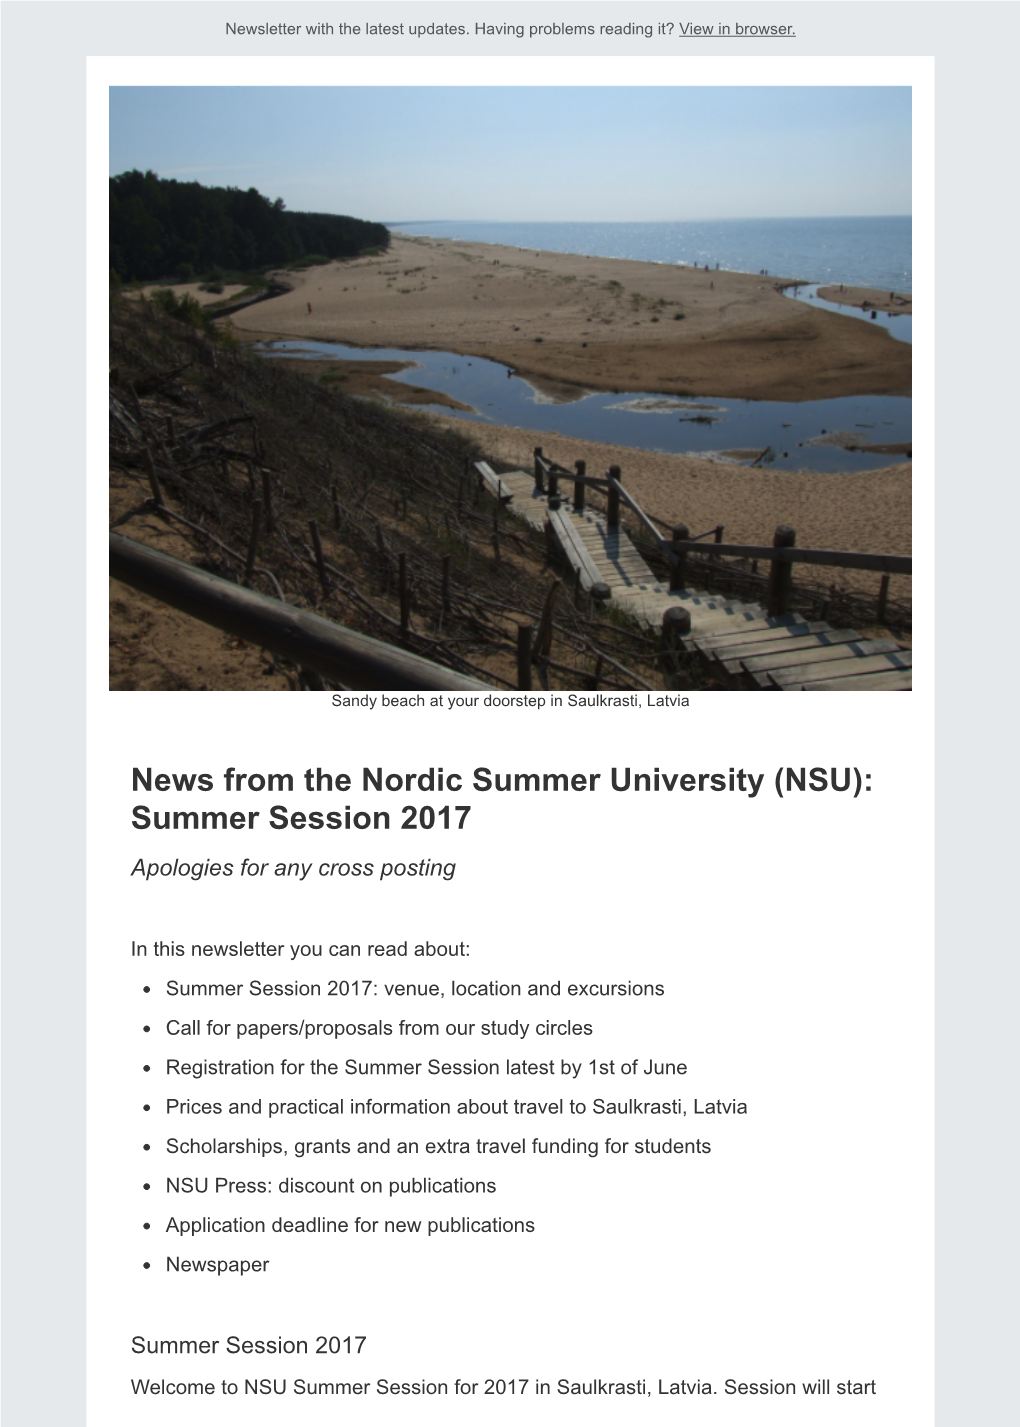 News from the Nordic Summer University (NSU): Summer Session 2017 Apologies for Any Cross Posting